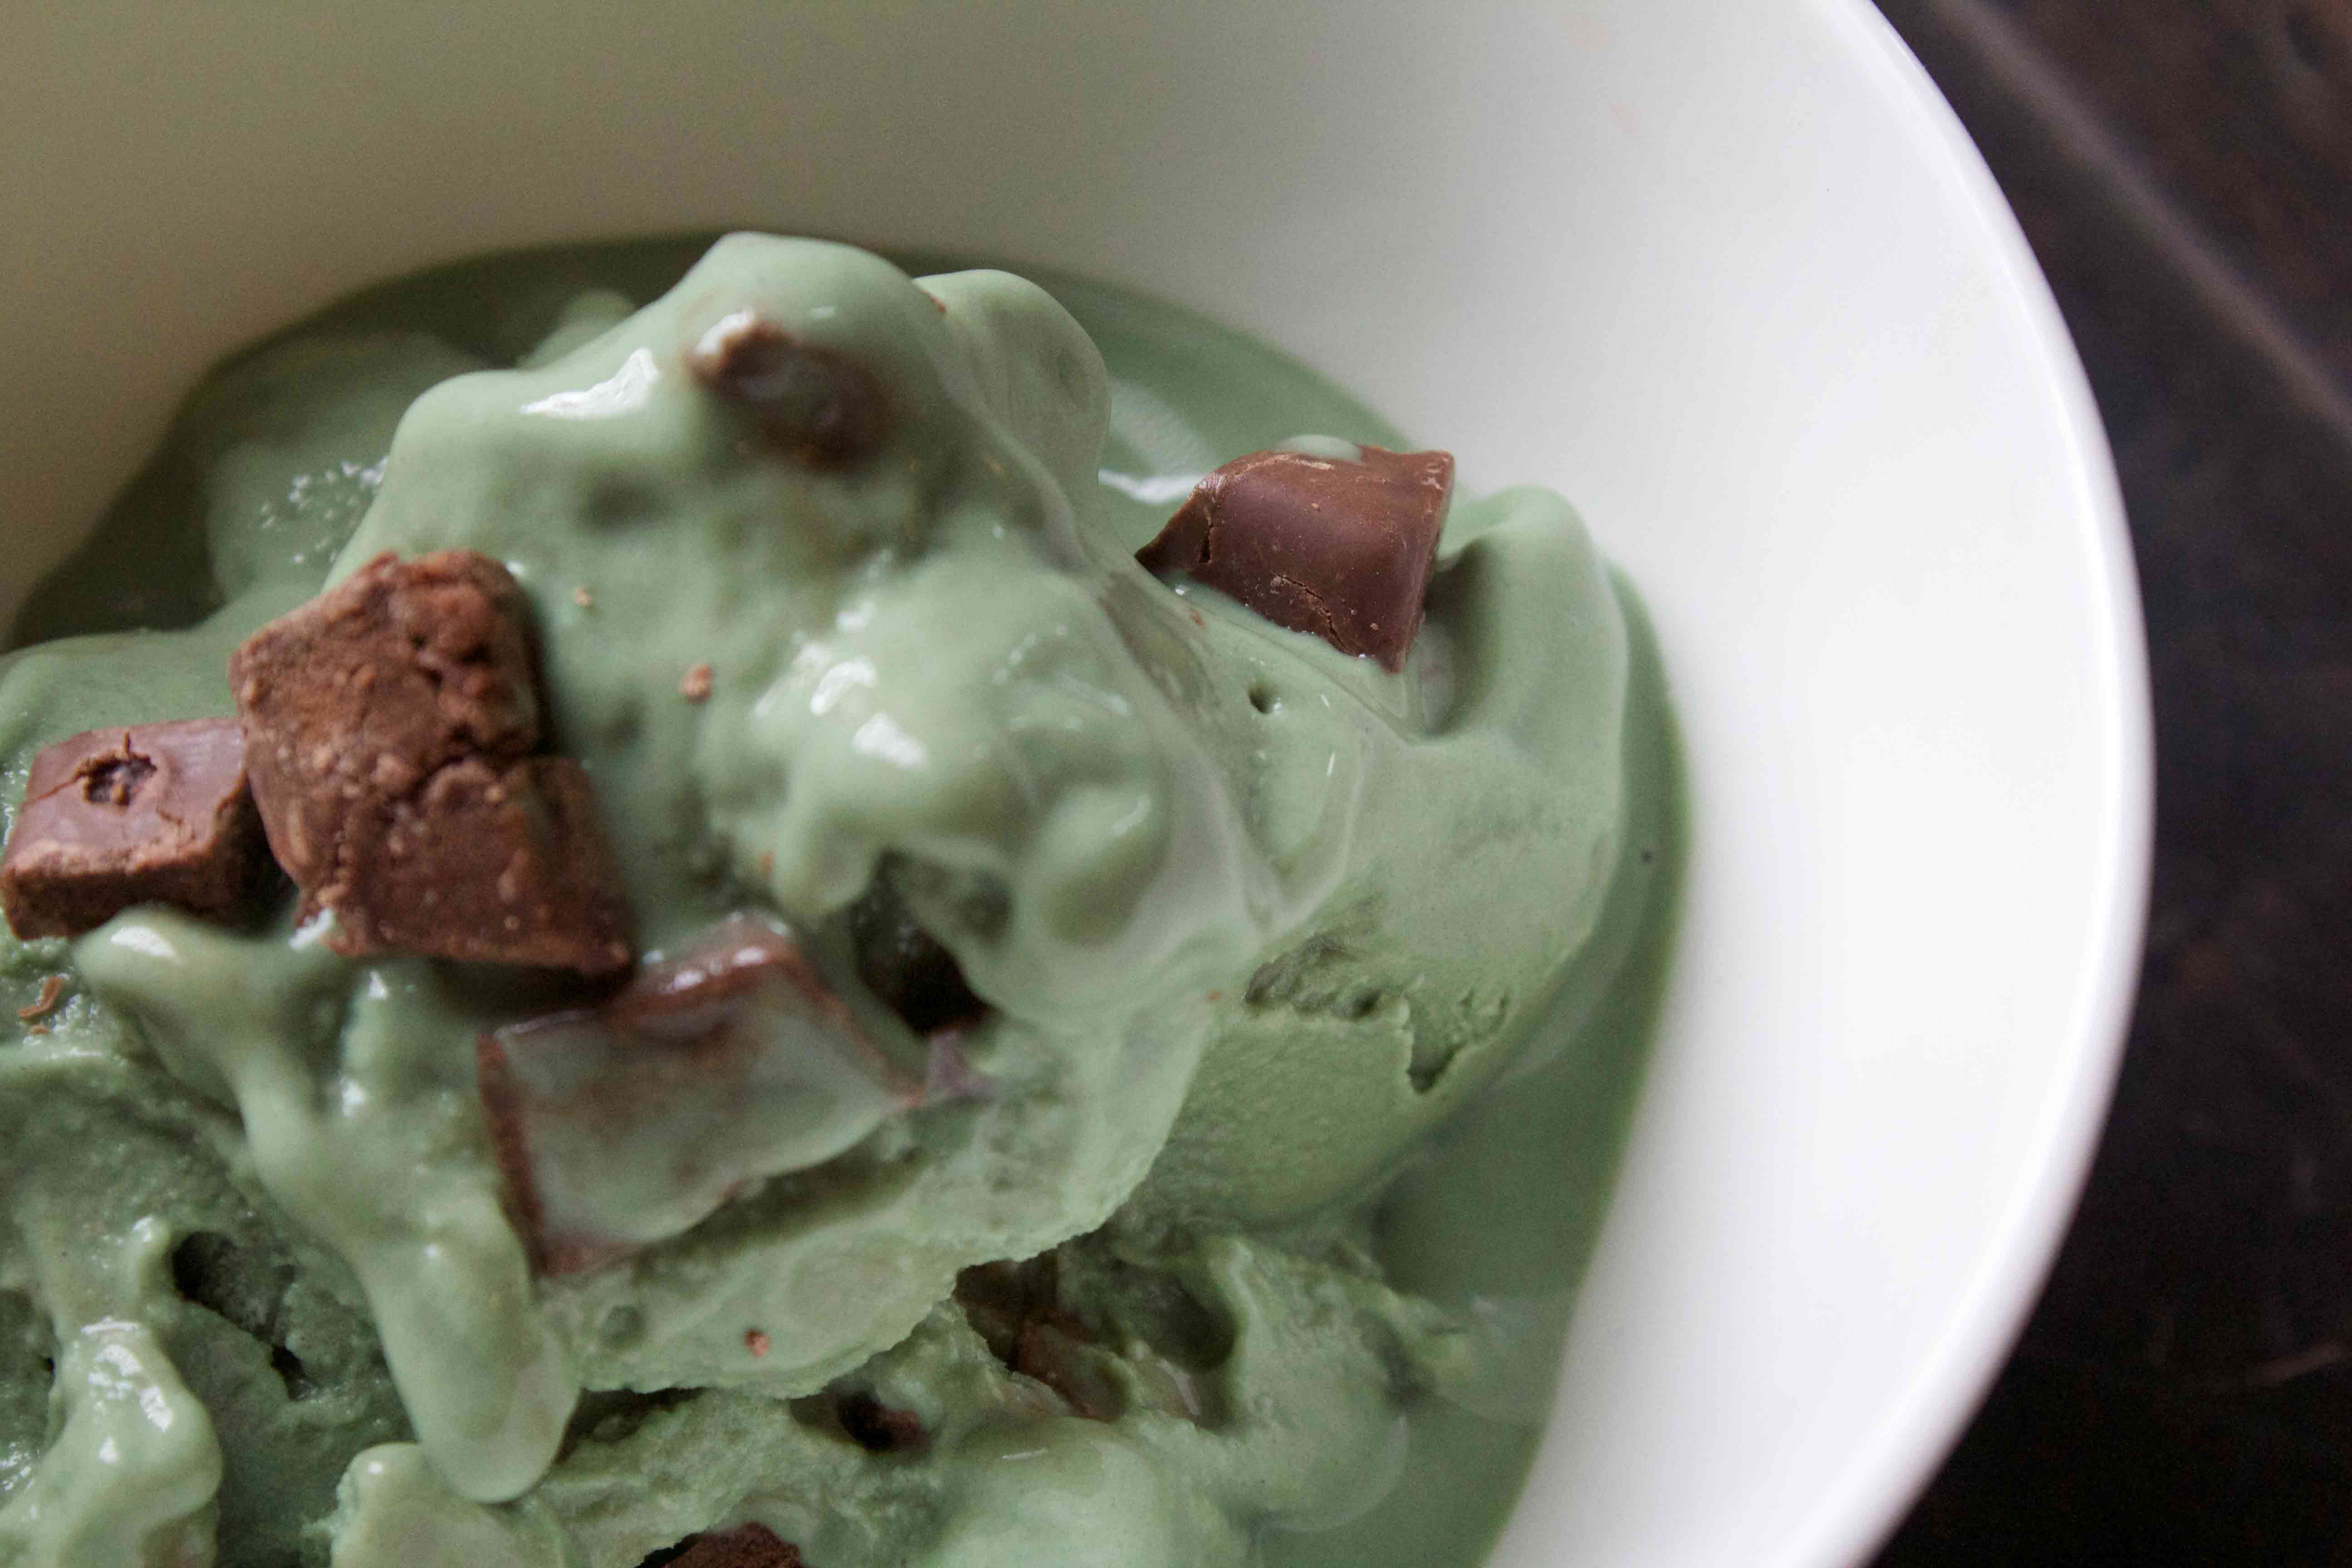 Mint Chocolate Chunk Protein Ice Cream. Uses Greek Yogurt and Sugar-Free Syrups to keep it low carb and weight loss surgery friendly!